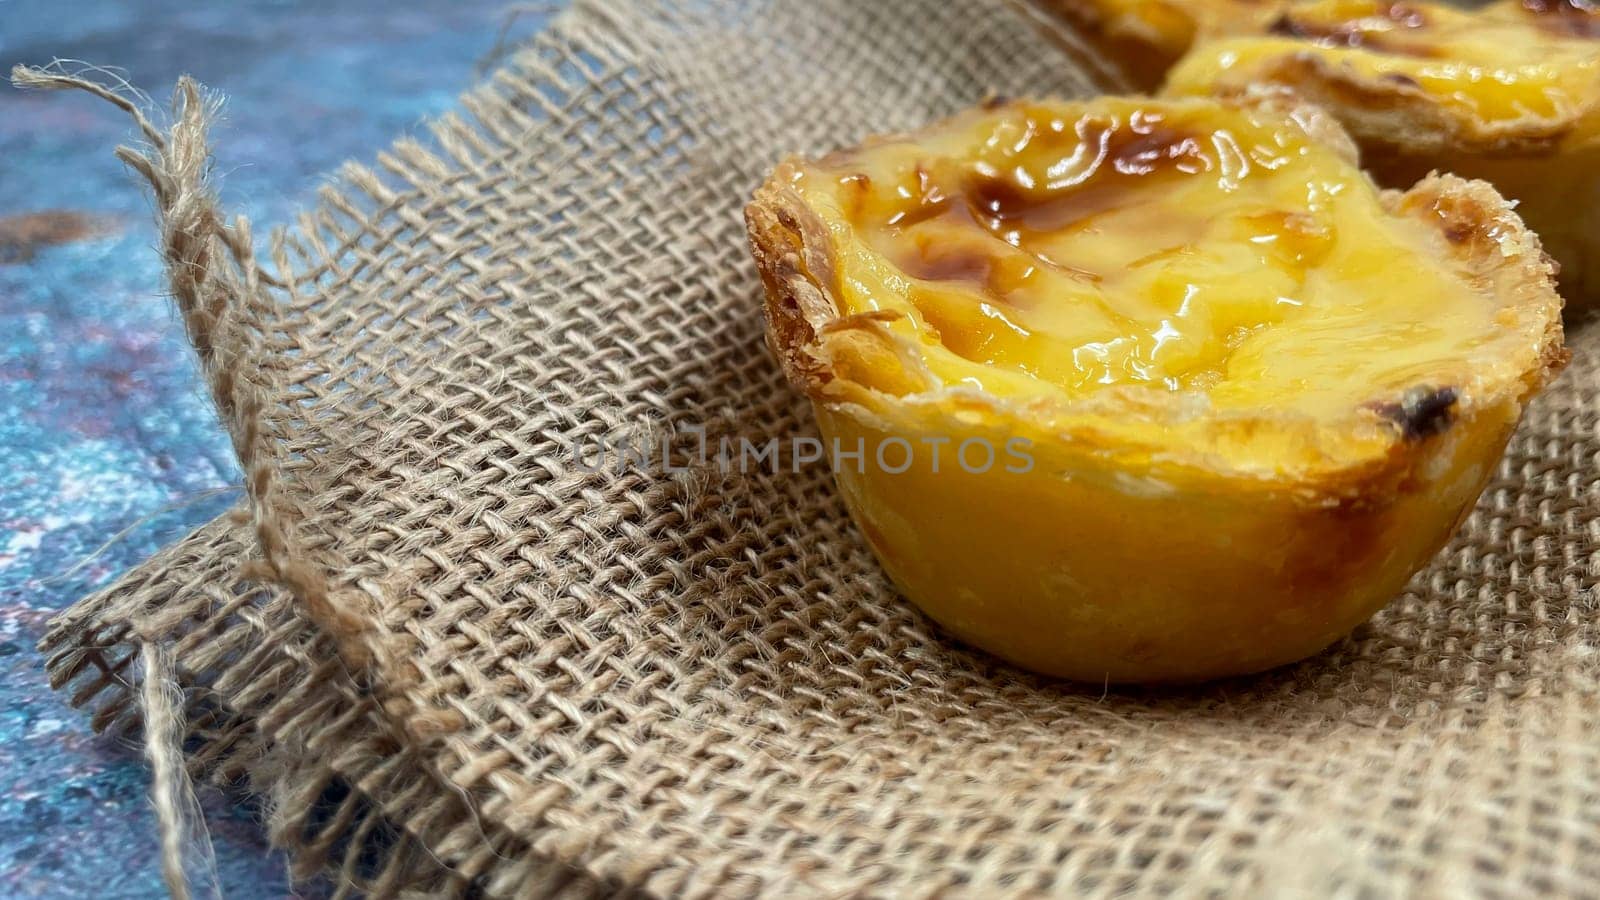 Lots of freshly baked desserts Pastel de nata or Portuguese egg tart. Pastel de Belm is a small pie with a crispy puff pastry crust and a custard cream filling. A small dessert, a cupcake